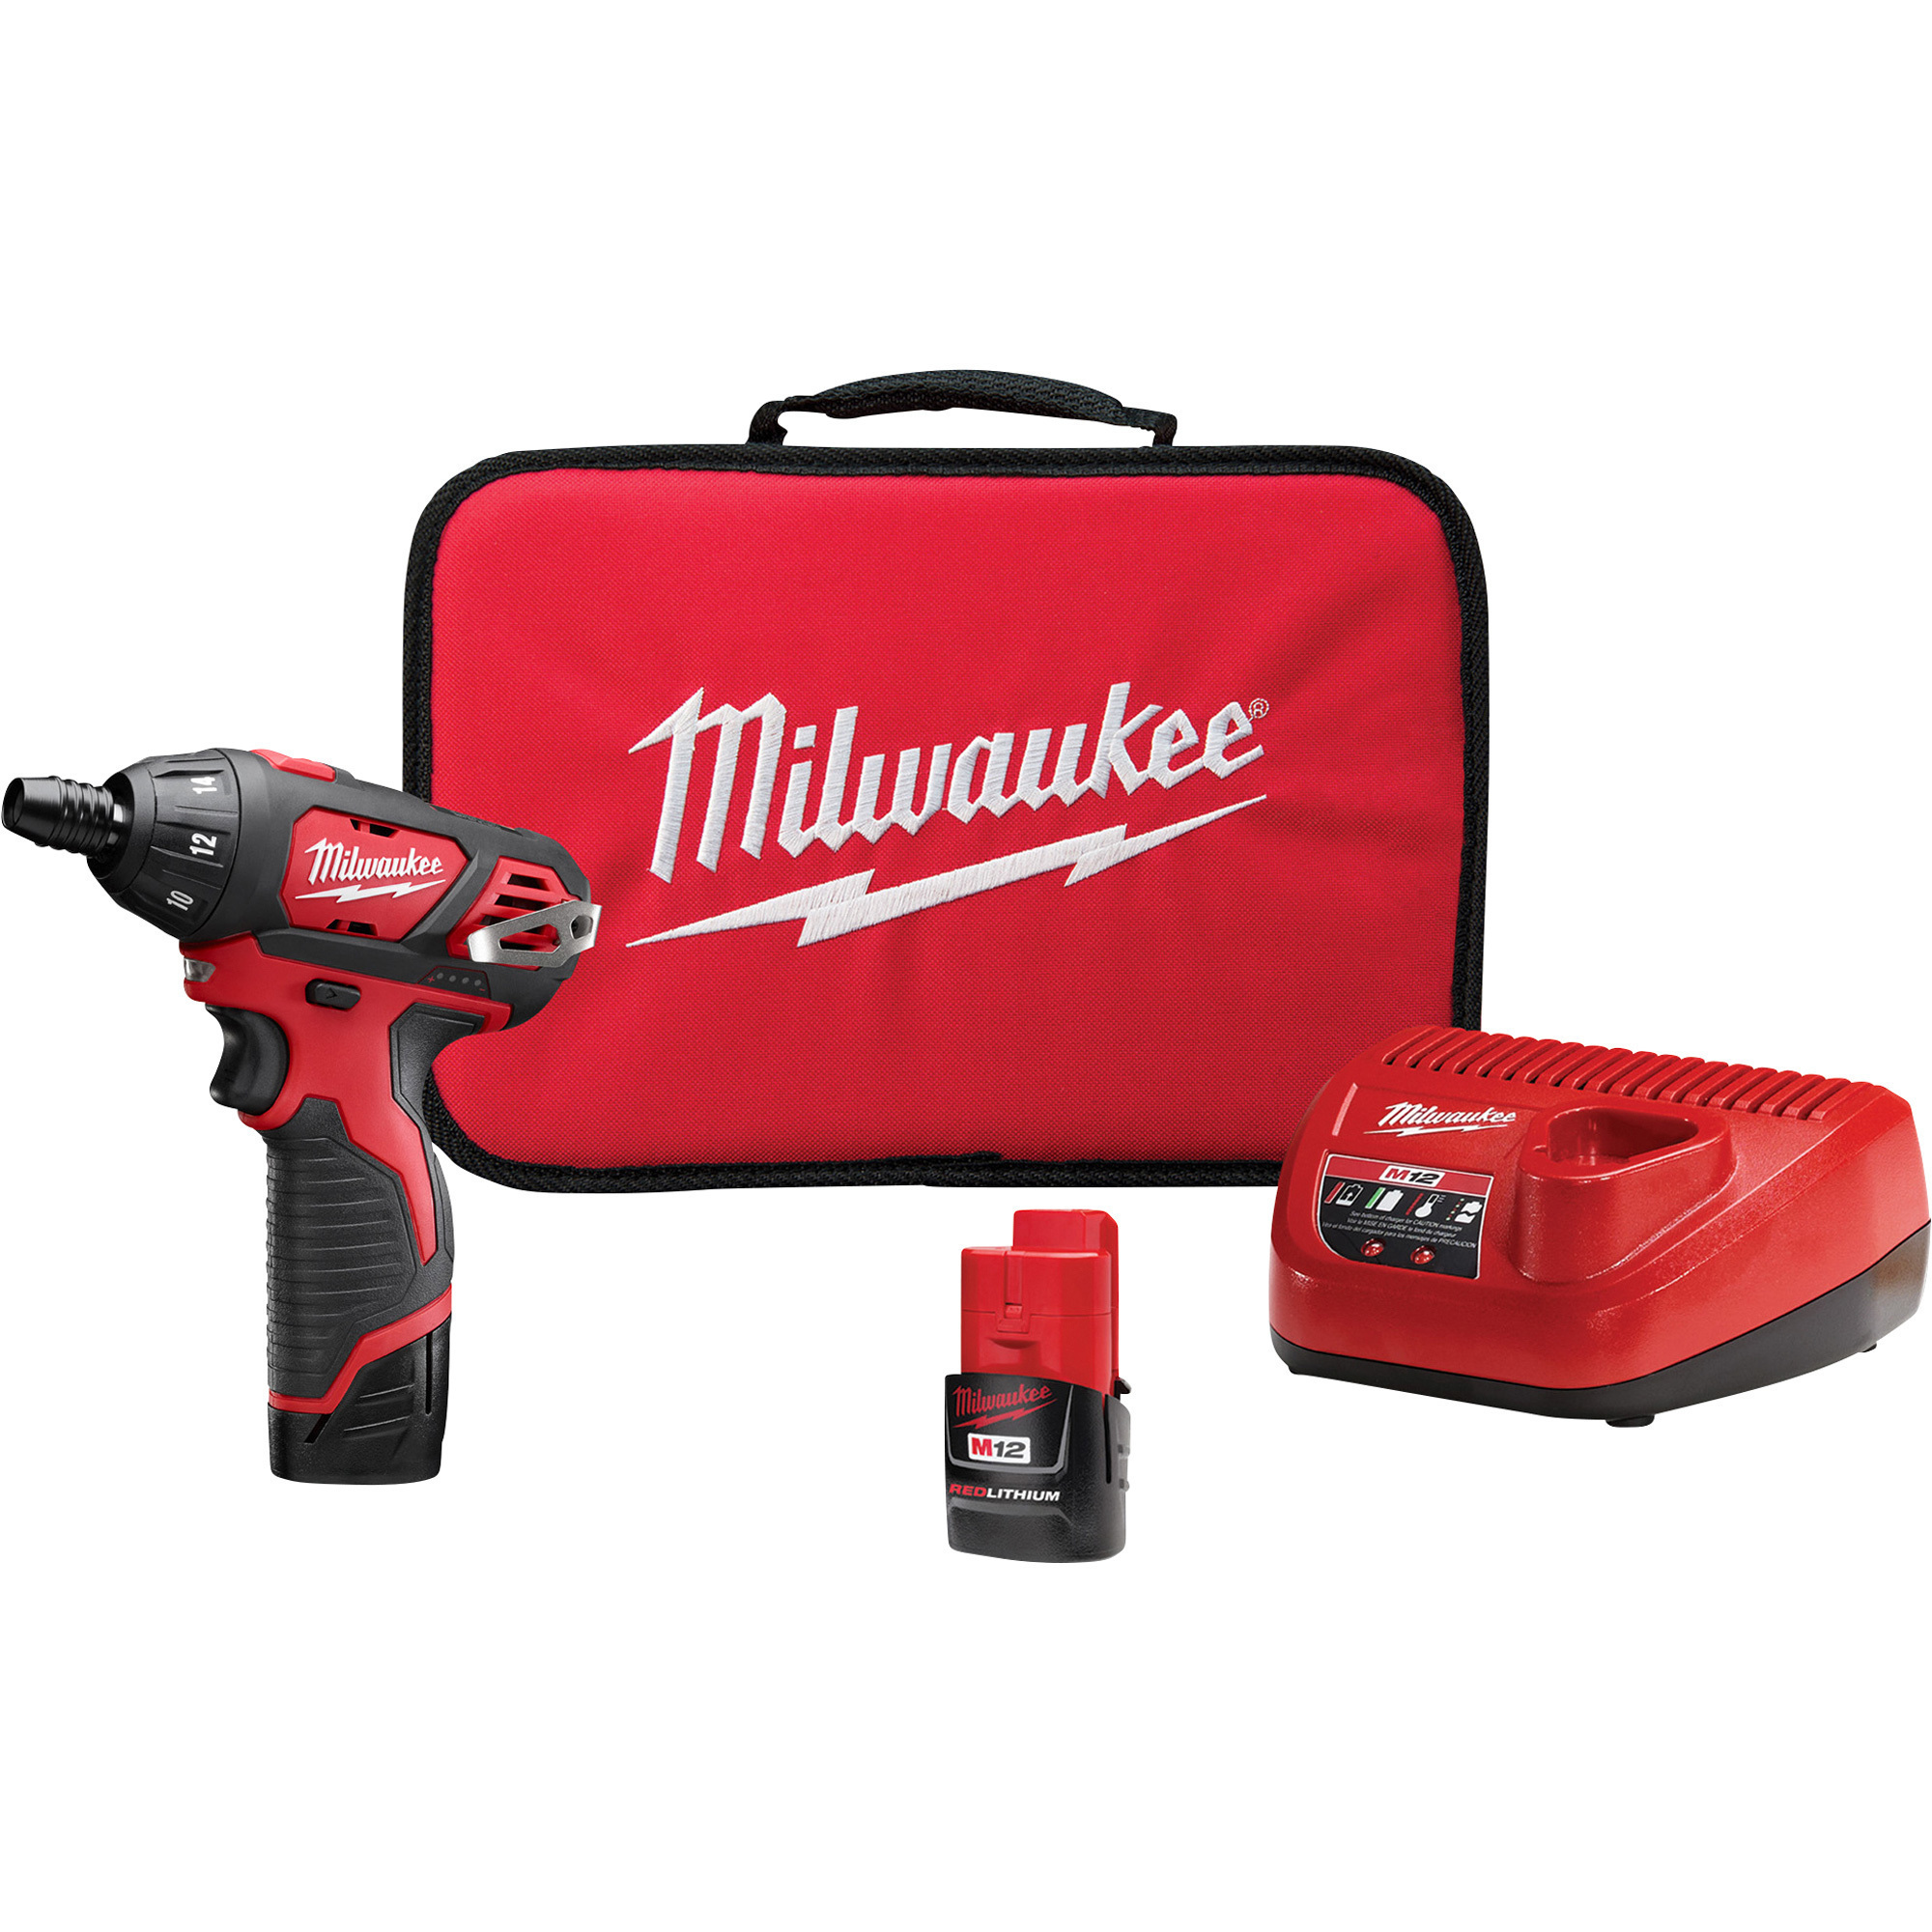 Milwaukee M12 Lithium-Ion Cordless Electric Subcompact Driver, 2 Batteries, 1/4Inch Keyless Chuck, 500 RPM, Model 2401-22